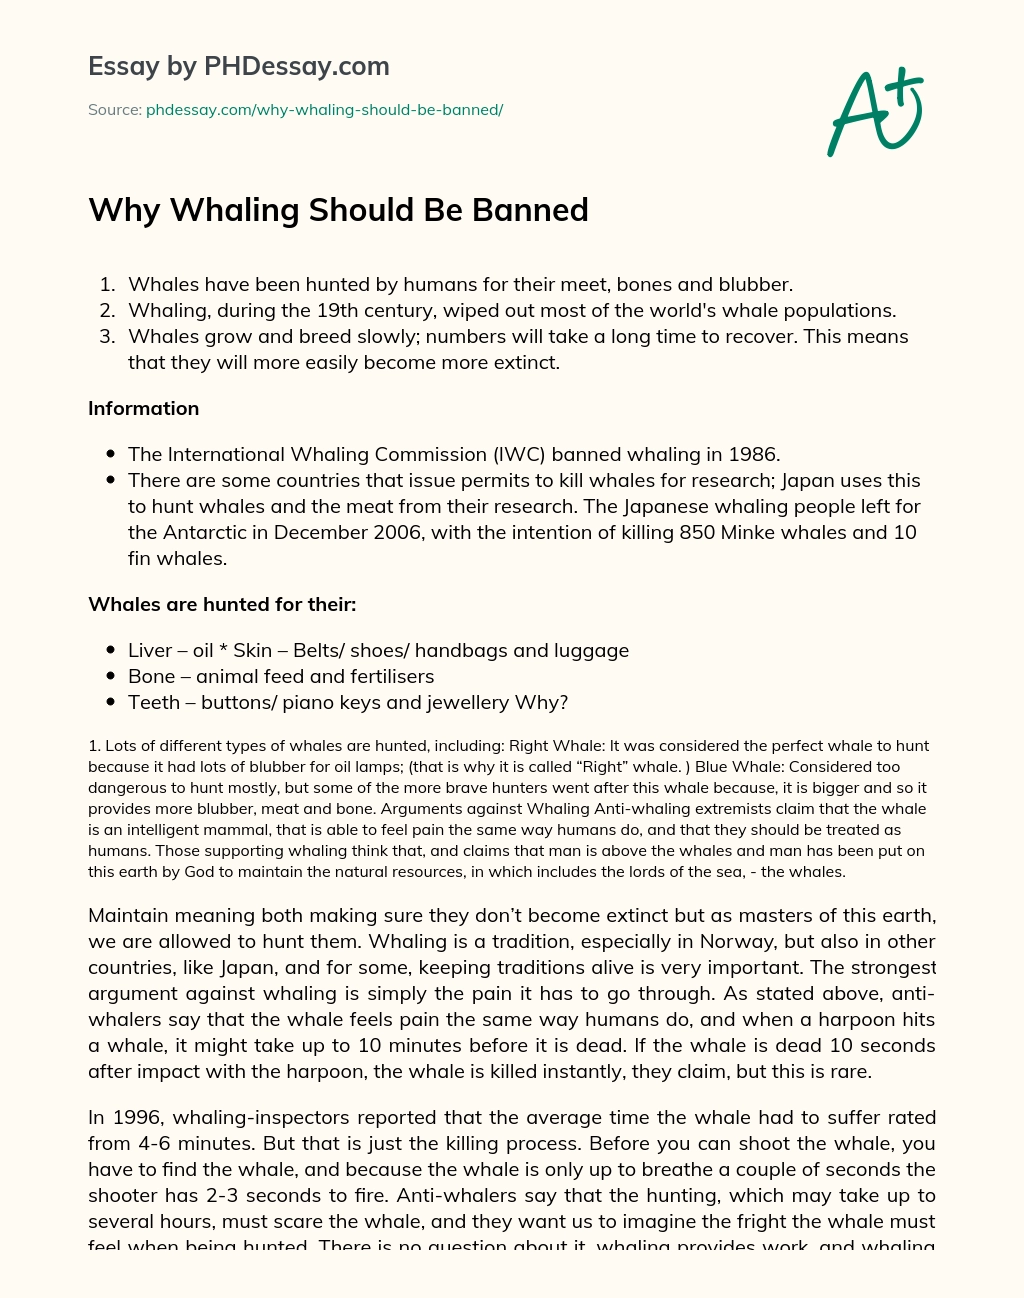 Why Whaling Should Be Banned essay